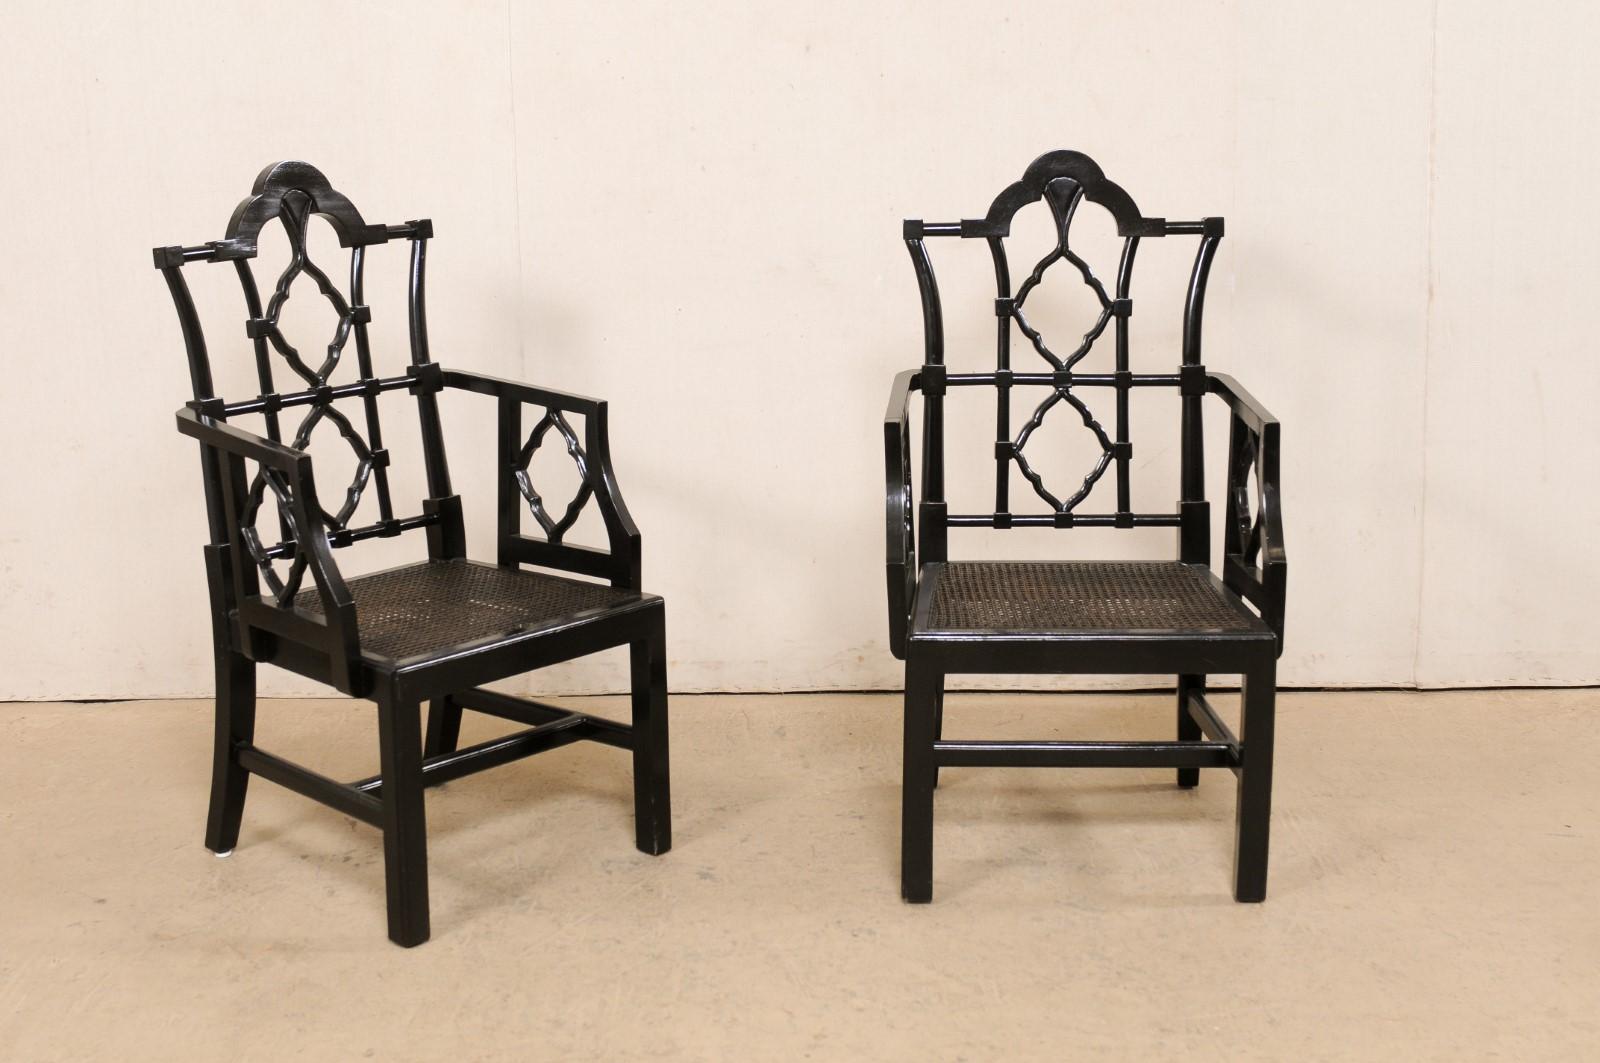 A pair of American-made wooden armchairs with cane seats. This vintage pair of Chippendale inspired occasional chairs have black wood frames, with raised-crest at back top-rails and a beautiful open lattice design, and hand-woven cane makes up the